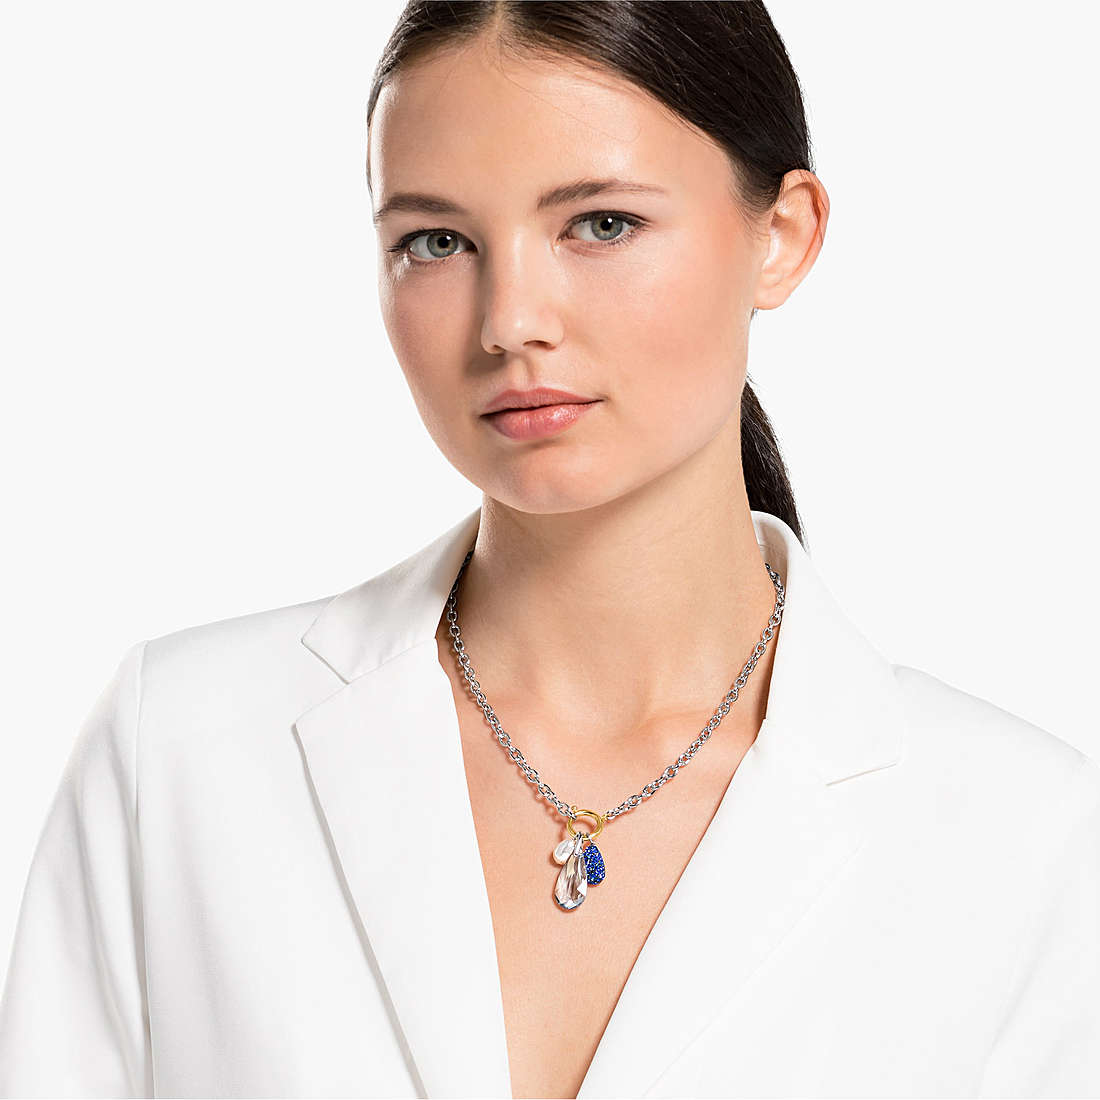 Swarovski necklaces The Elements woman 5563511 wearing